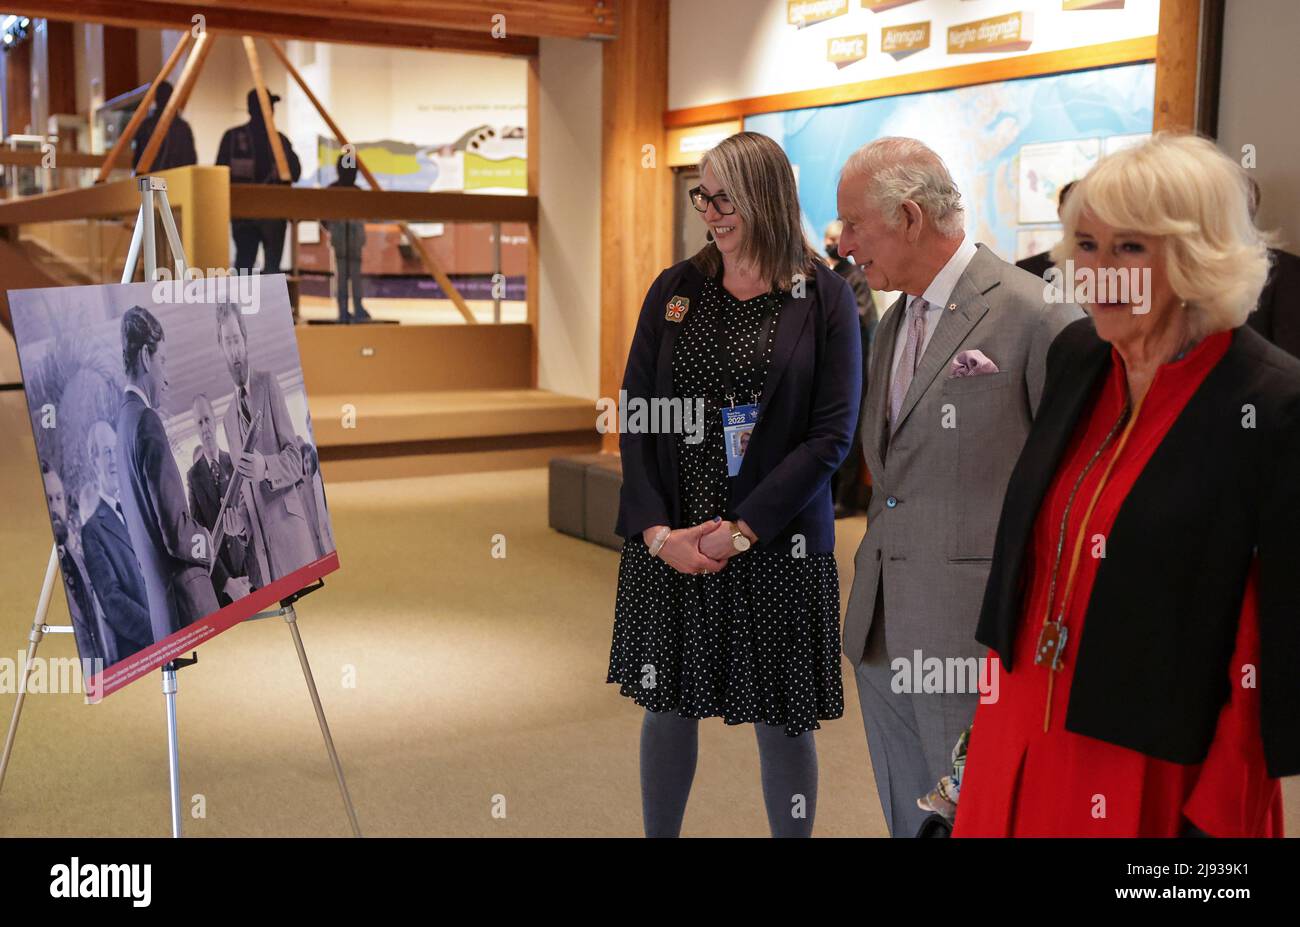 The Prince of Wales and Duchess of Cornwall with Dr Sarah Carr-Locke, Director of The Prince of Wales Northern Heritage Centre Wales, viewing a display of archival images from the opening in 1979 and learn about how the Heritage Centre has evolved throughout the decades since Charles' last visit, as they visit the Heritage Centre in Yellowknife during their three-day trip to Canada to mark the Queen's Platinum Jubilee. Picture date: Thursday May 19, 2022. Stock Photo